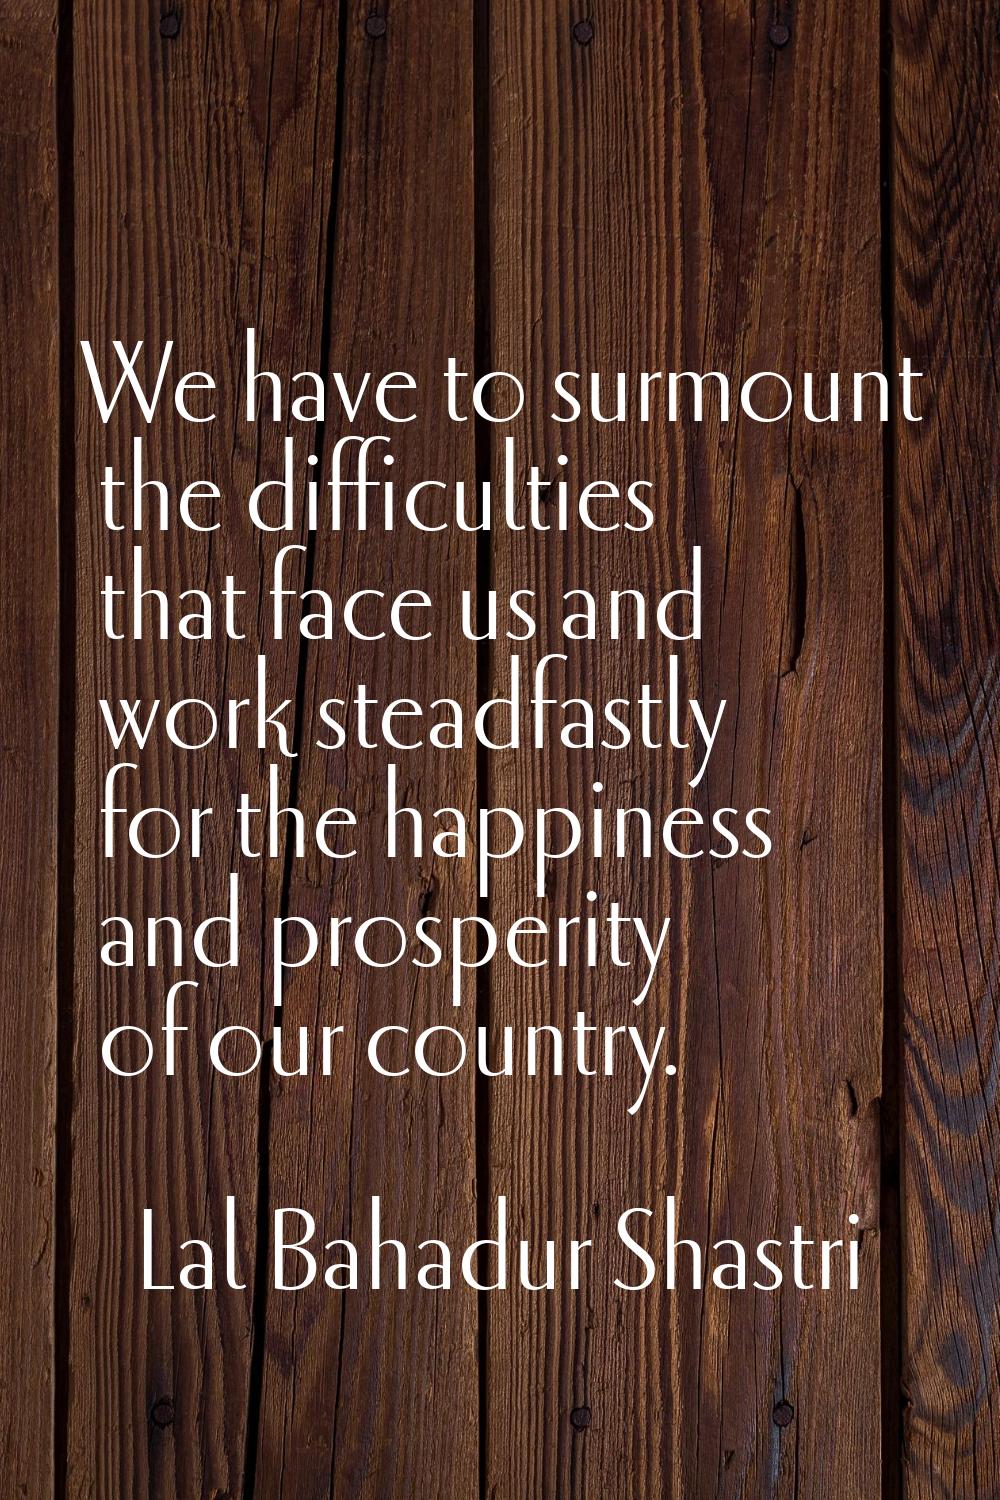 We have to surmount the difficulties that face us and work steadfastly for the happiness and prospe